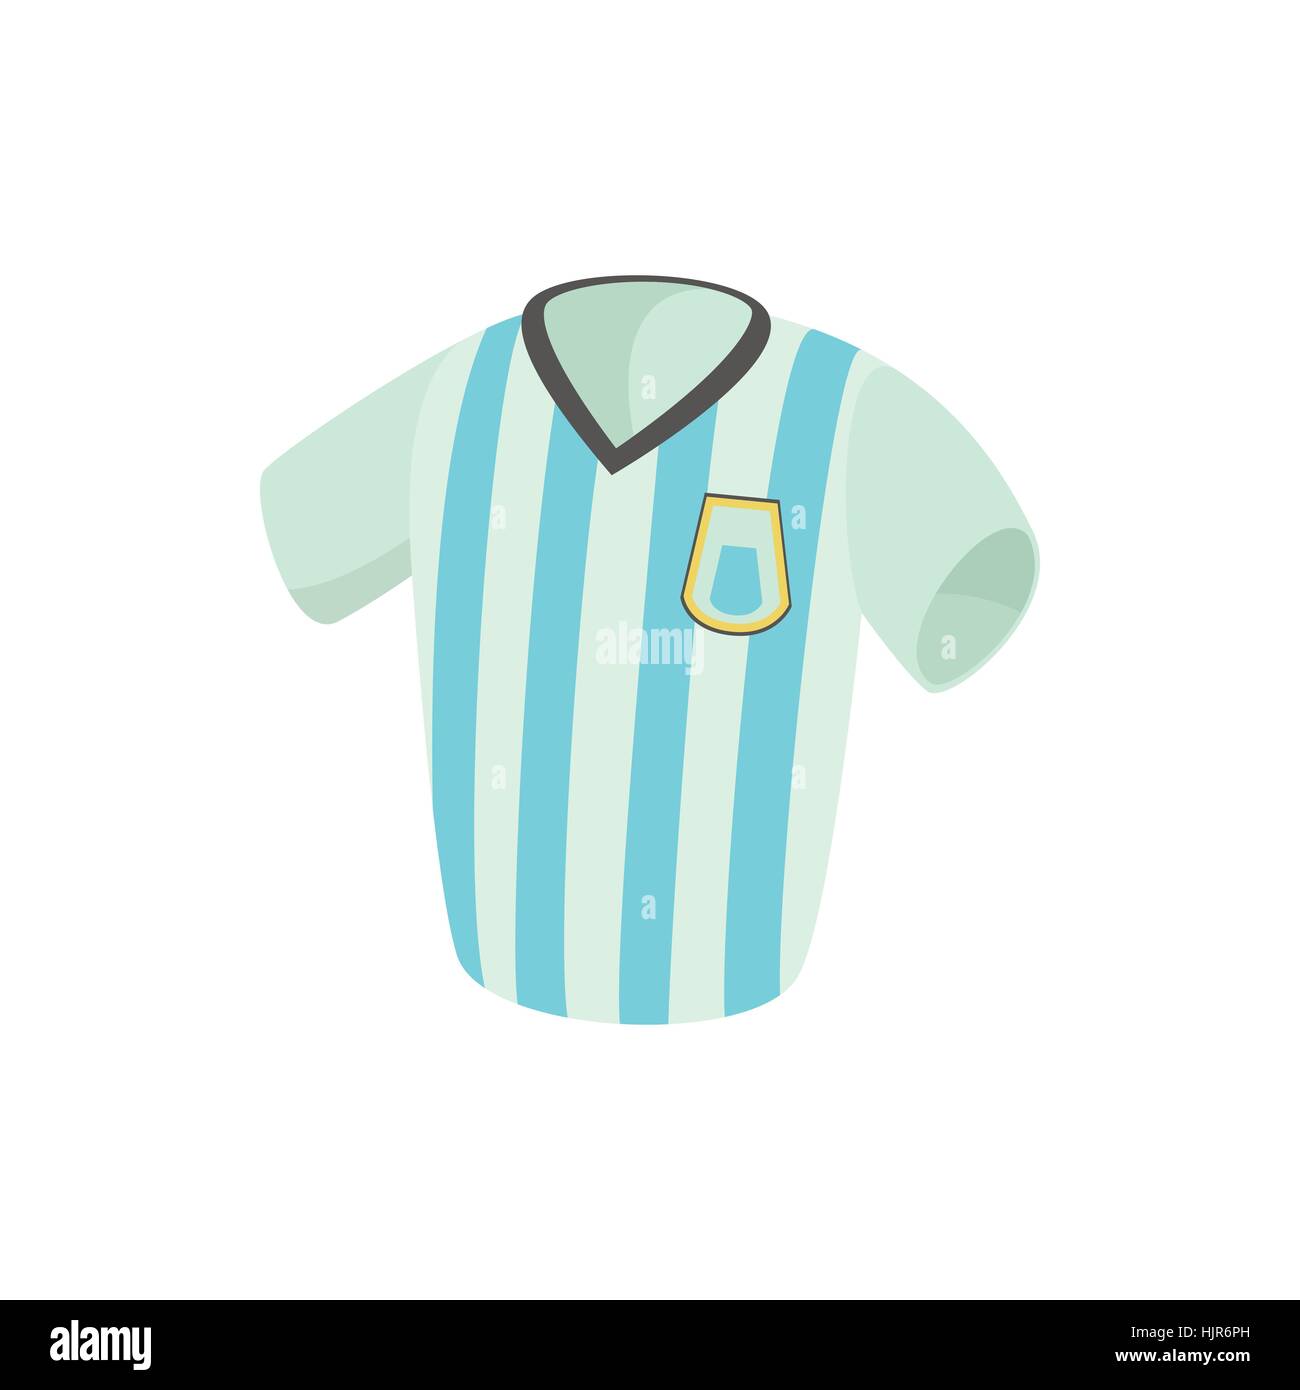 How To Style A Soccer Jersey